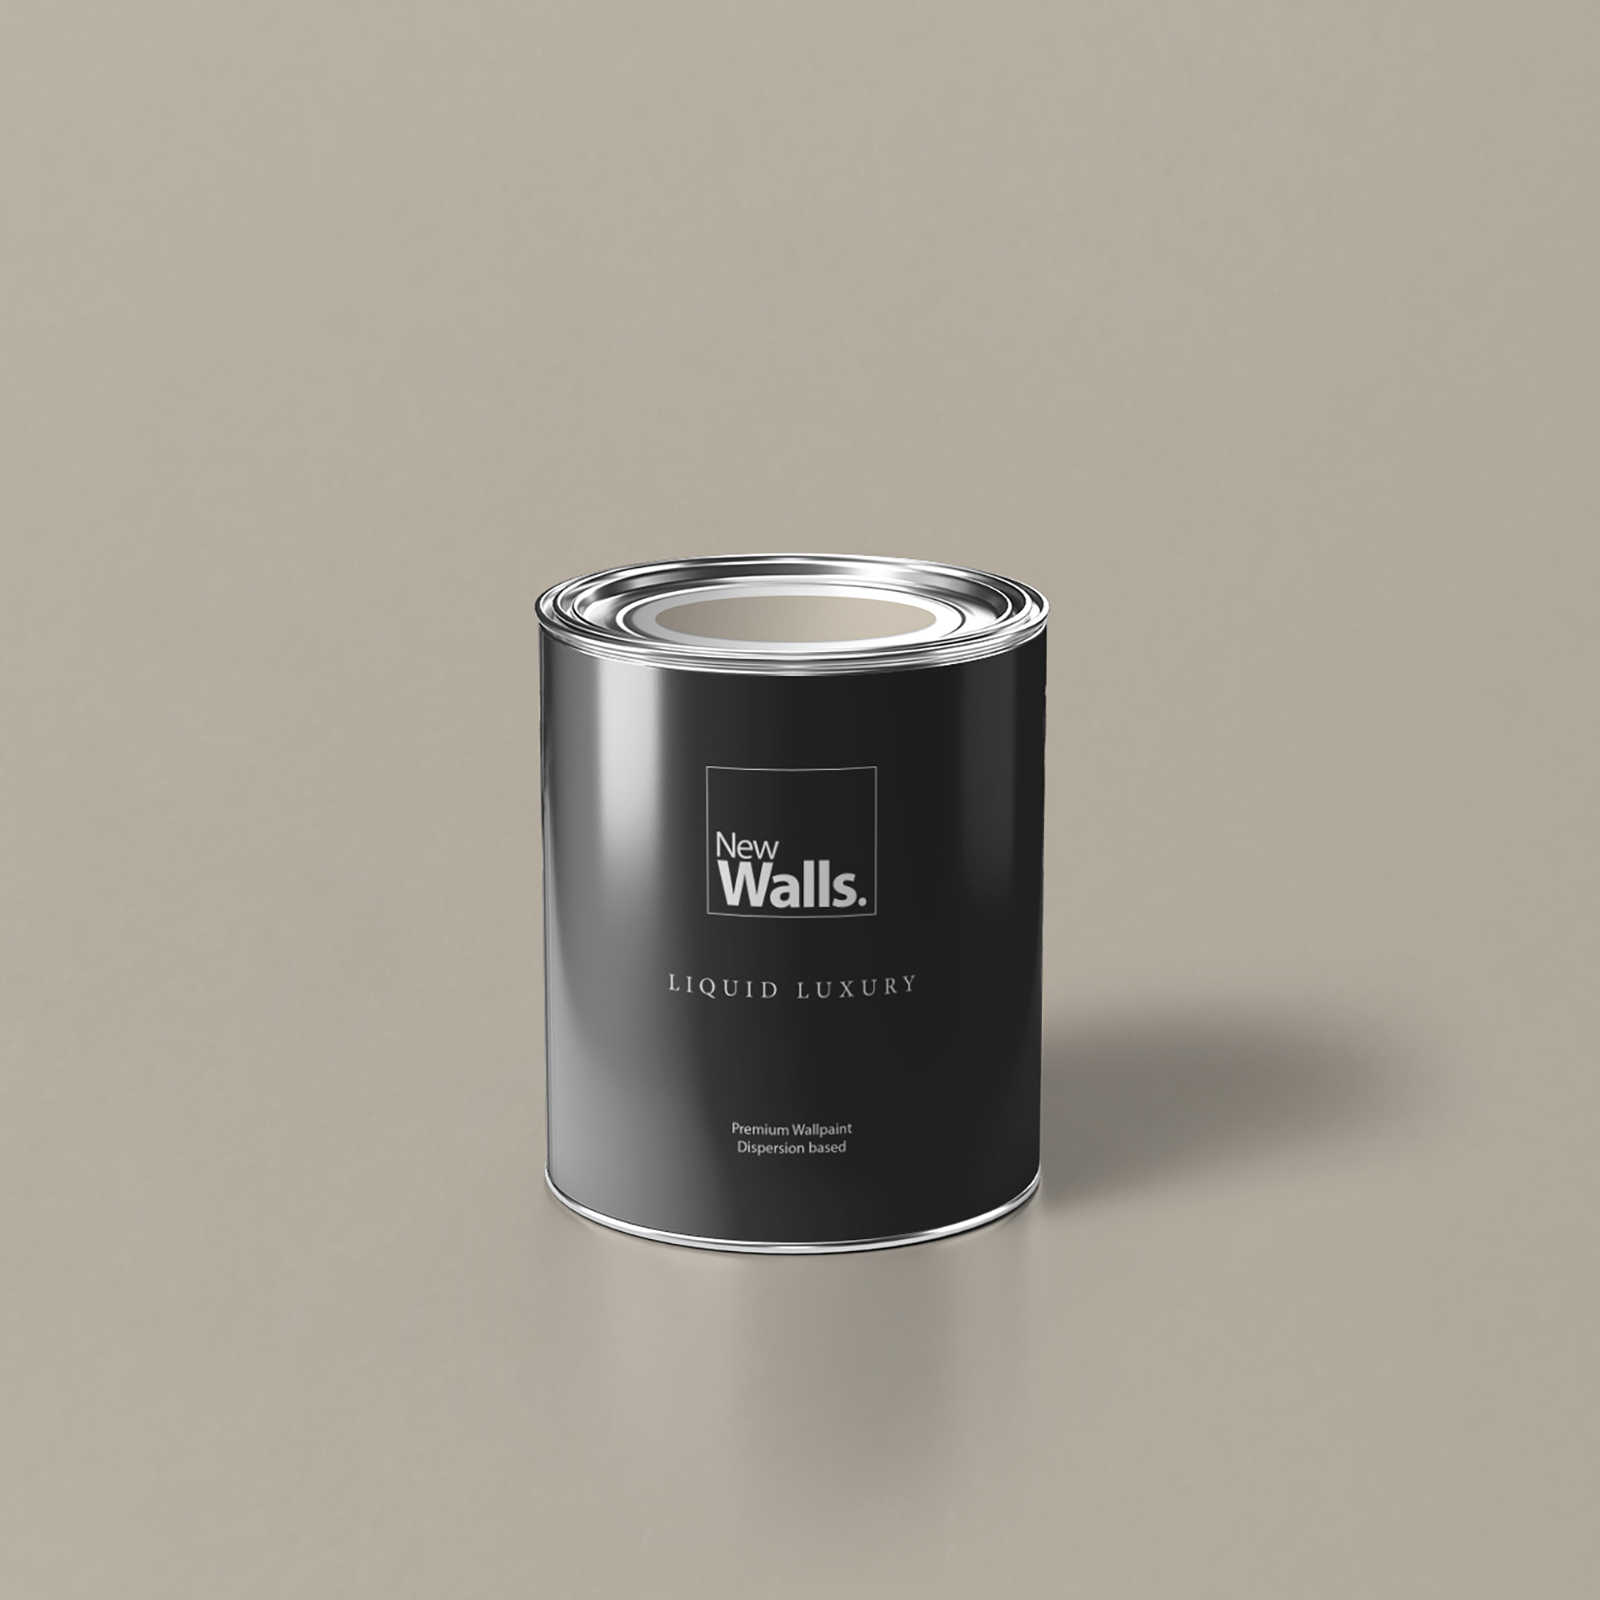             Premium Wall Paint cosy taupe »Talented calm taupe« NW700 – 1 litre
        